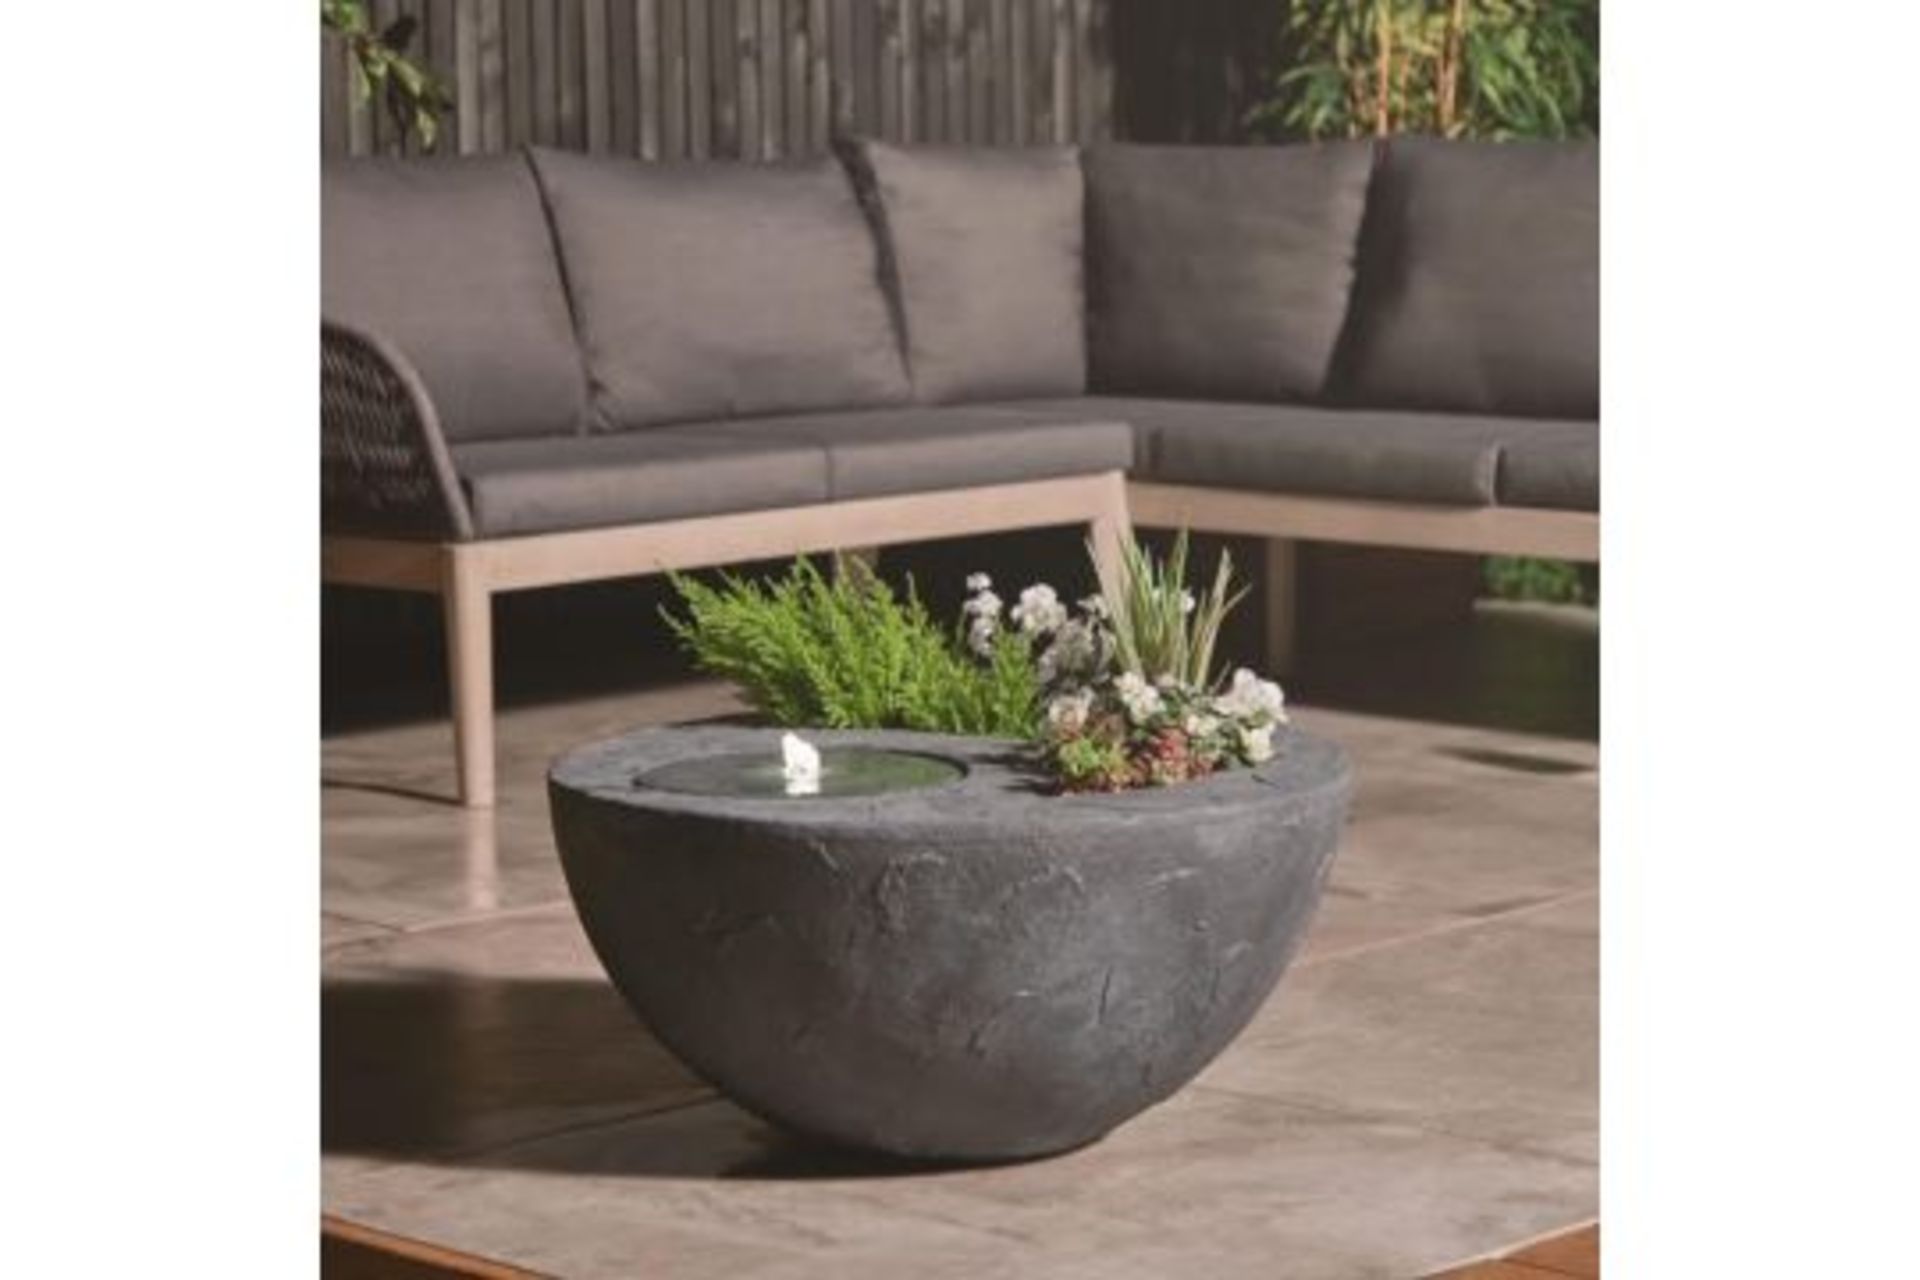 New & Boxed Dual Water Feature and Planter - Garden Bowl Design Planter, Indoor/Outdoor LED Lights - Image 3 of 6